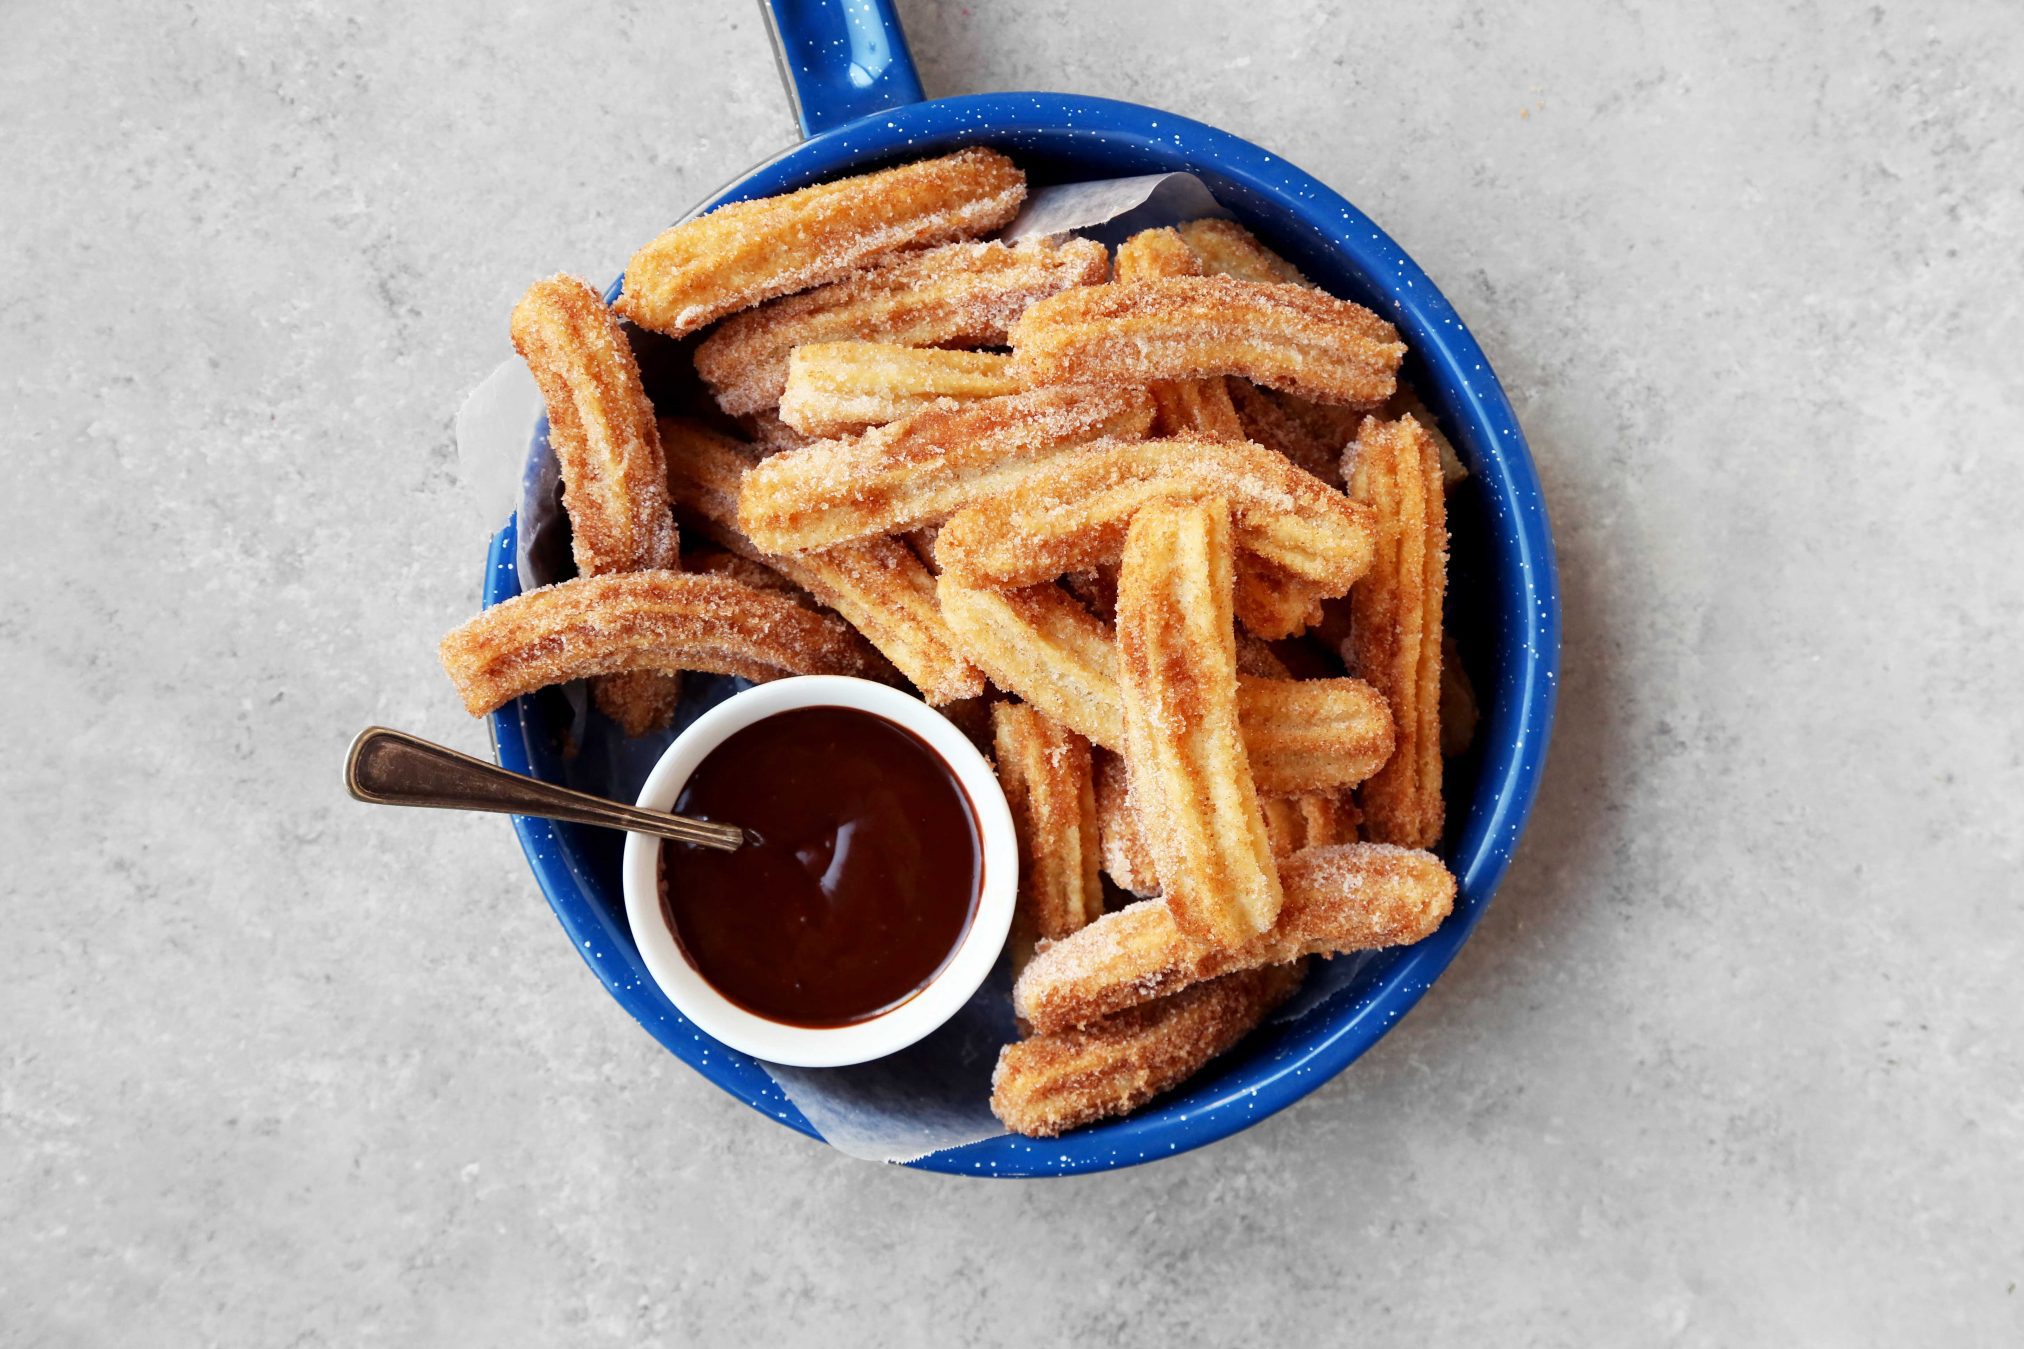 Fry the churros and drain on paper towels as described earlier. 